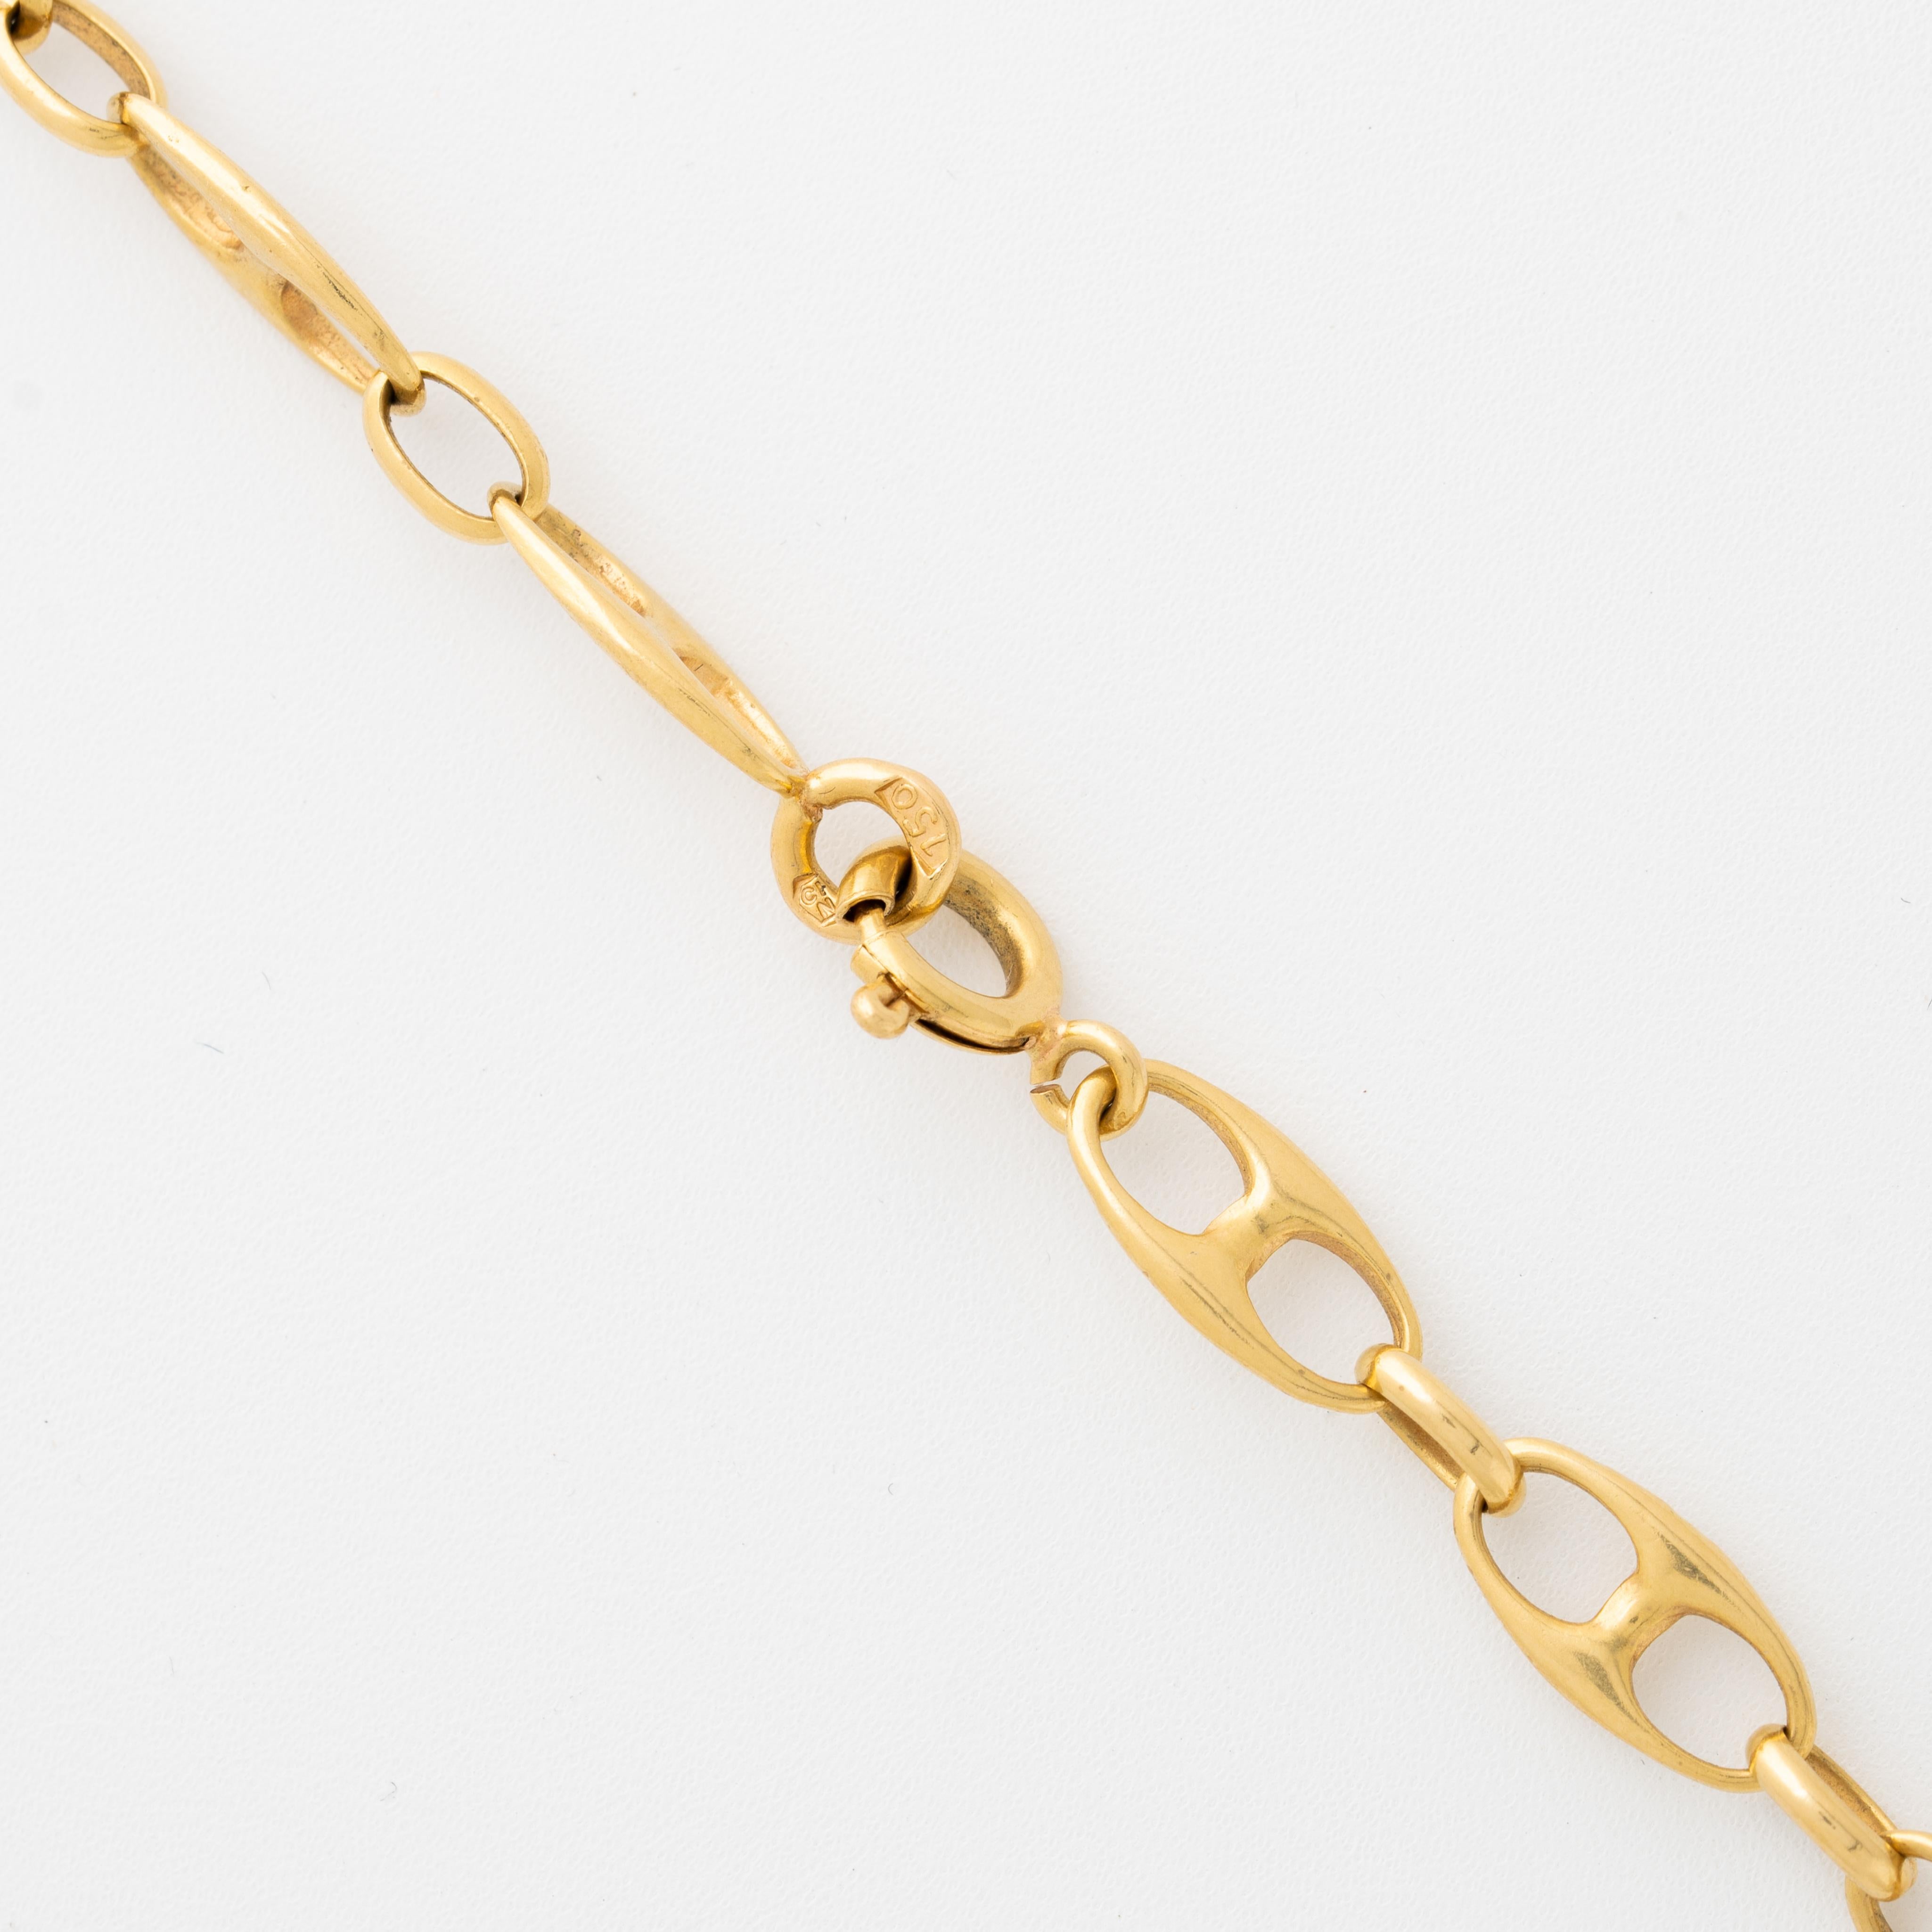 Vintage 18 Karat Yellow Gold Marine Link Chain, c.1970s In Good Condition For Sale In New York, NY